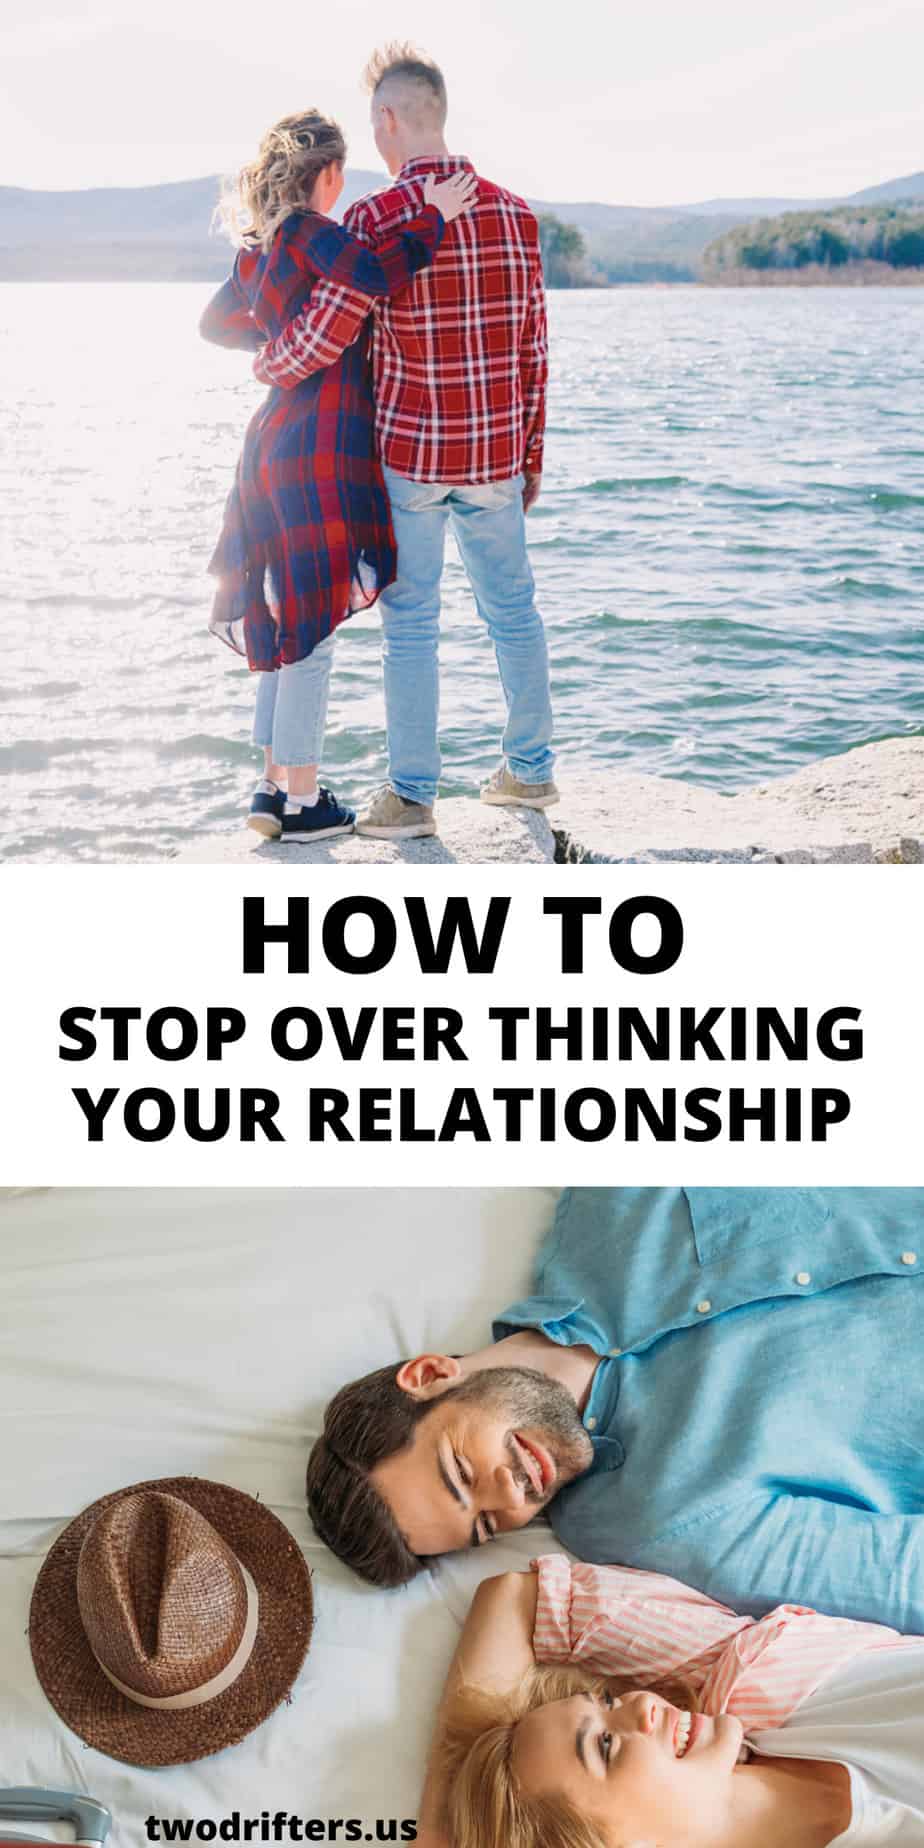 Pinterest social image that says “How to Stop Over Thinking Your Relationship.”